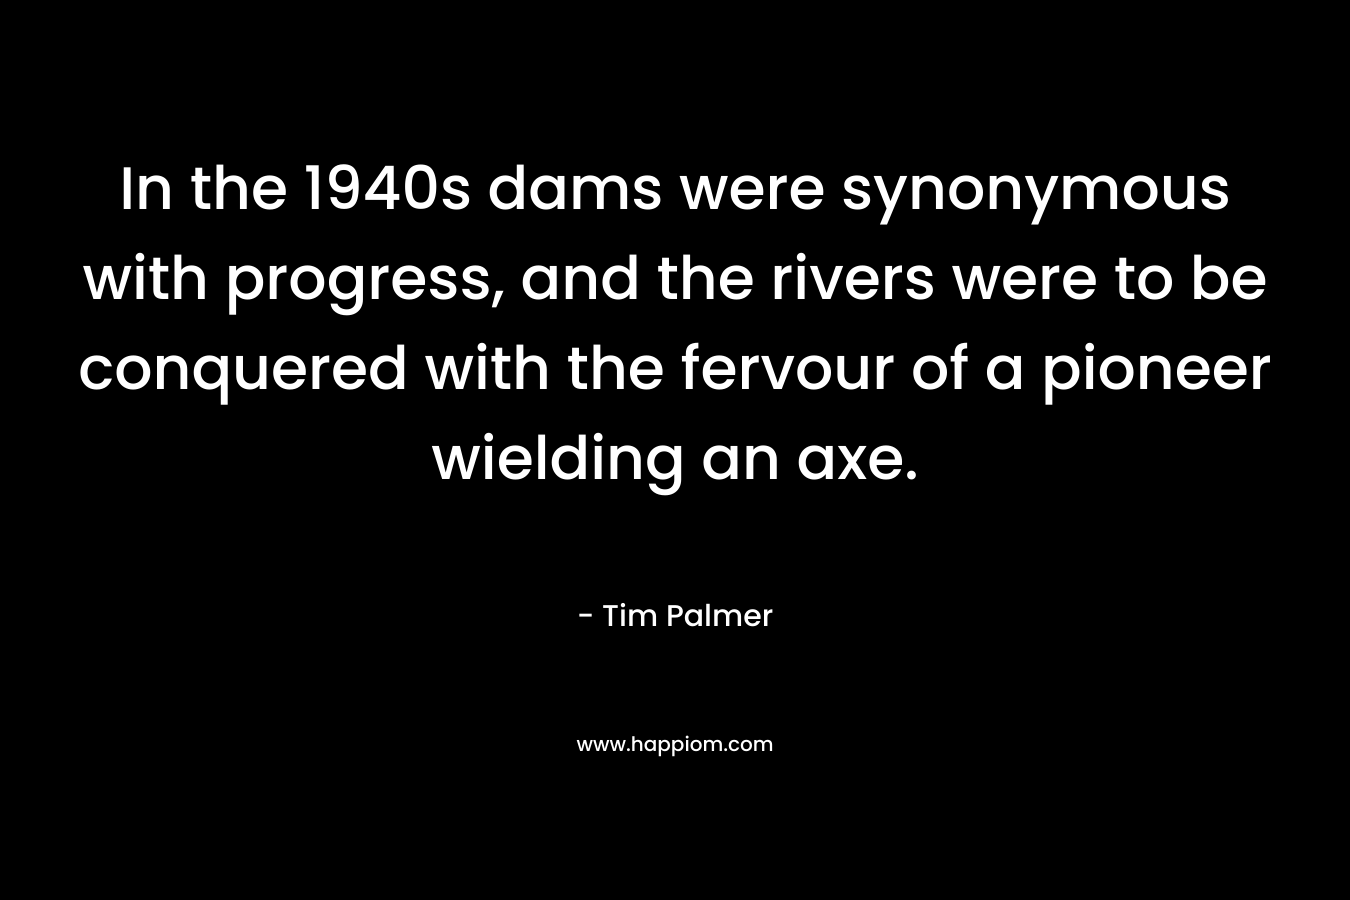 In the 1940s dams were synonymous with progress, and the rivers were to be conquered with the fervour of a pioneer wielding an axe. – Tim Palmer